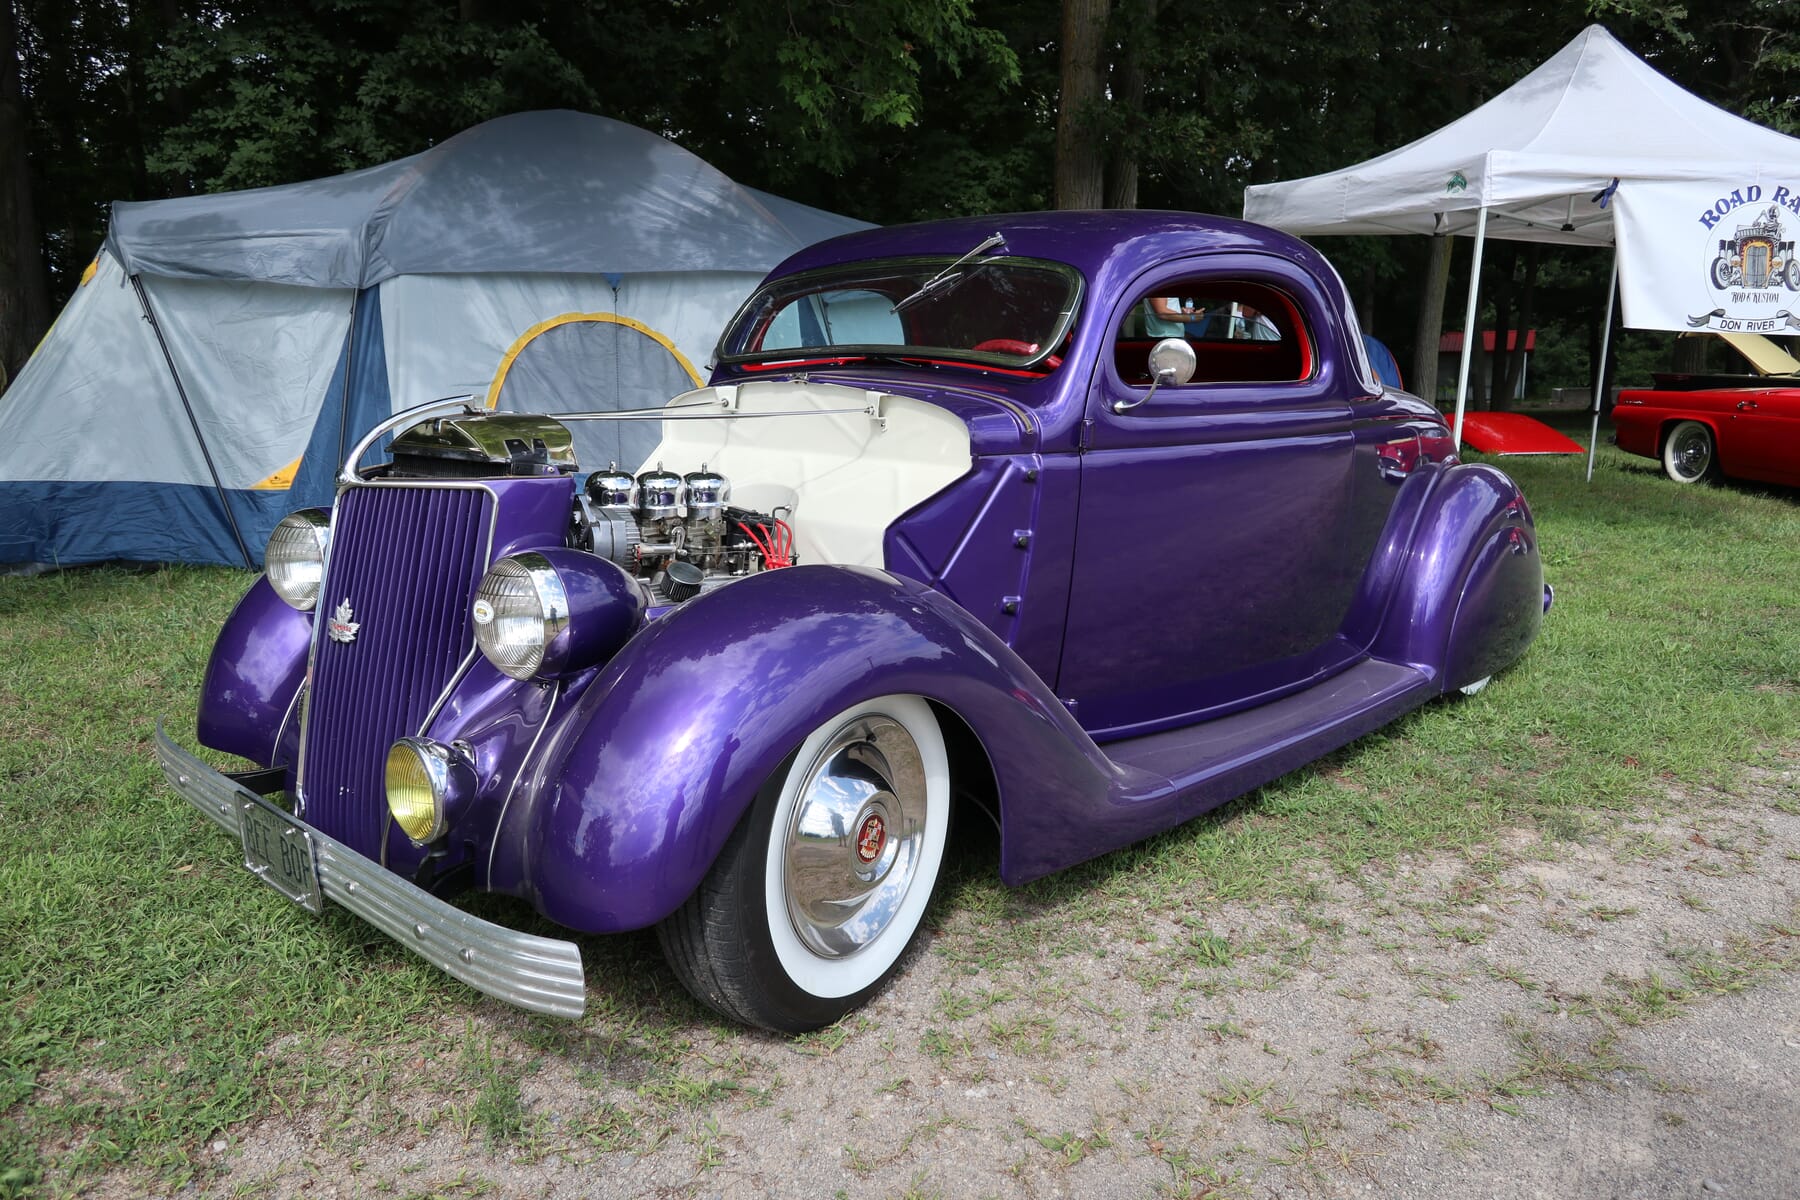 1936 Ford custom built in 2002 with a 355 Chevy engine